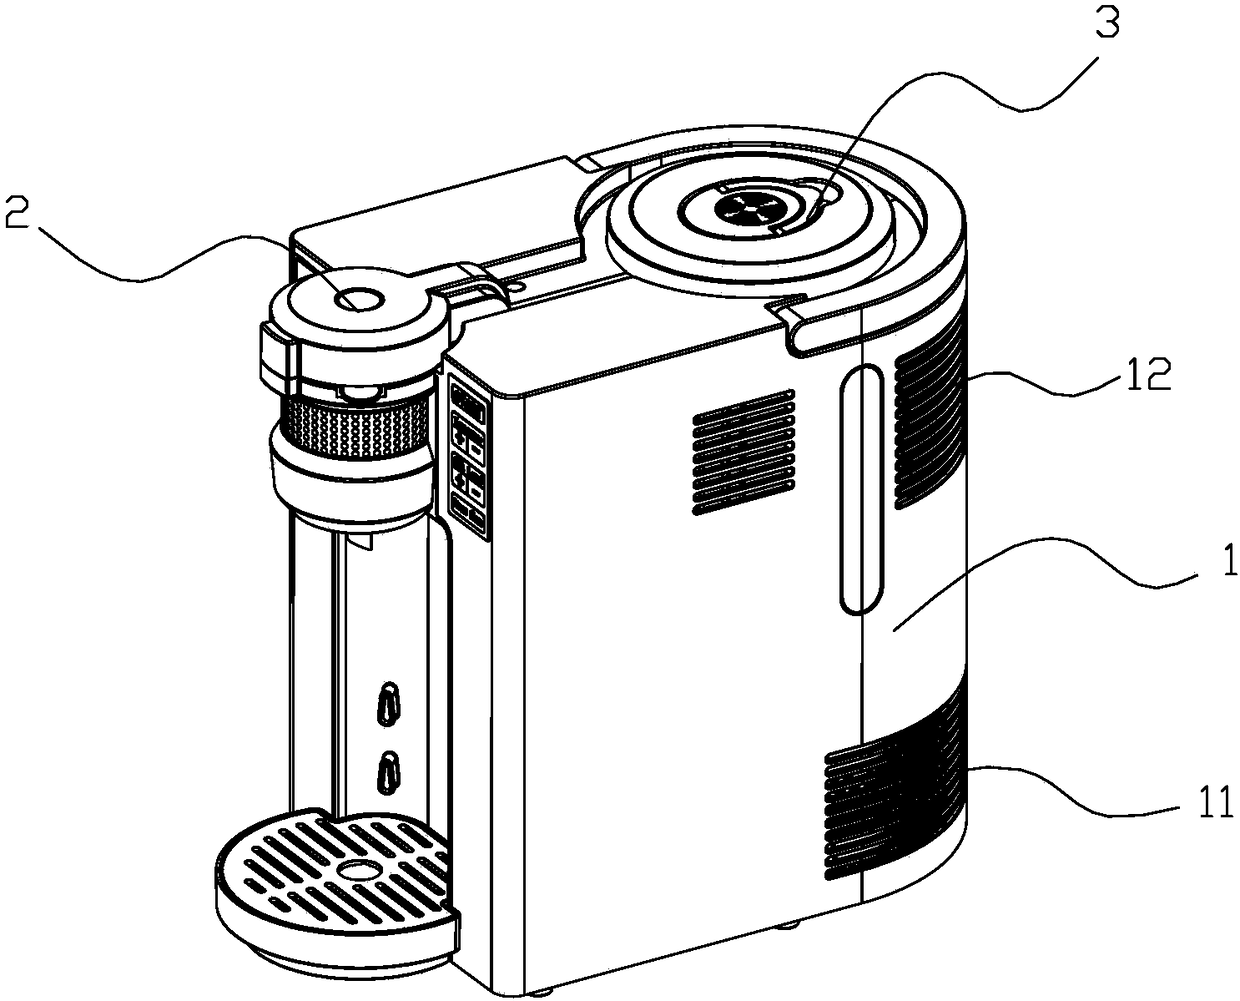 A brewing device for capsule beverage